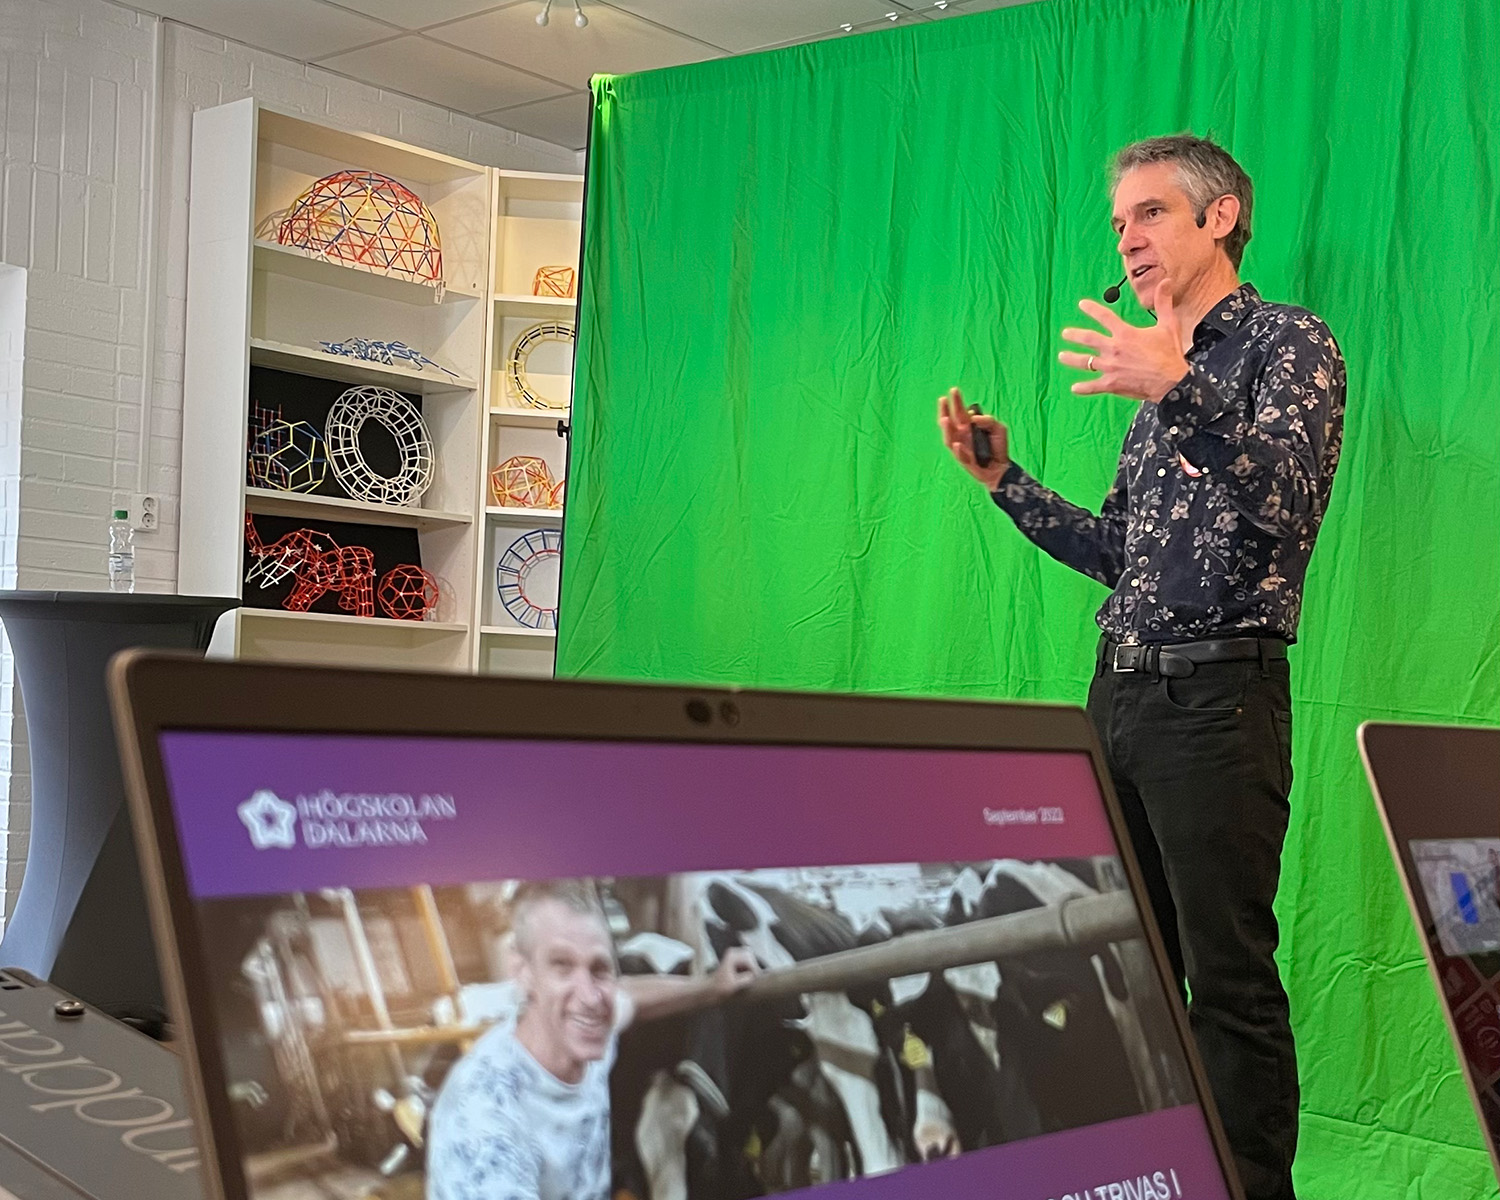 A man is talking in front of a green screen.